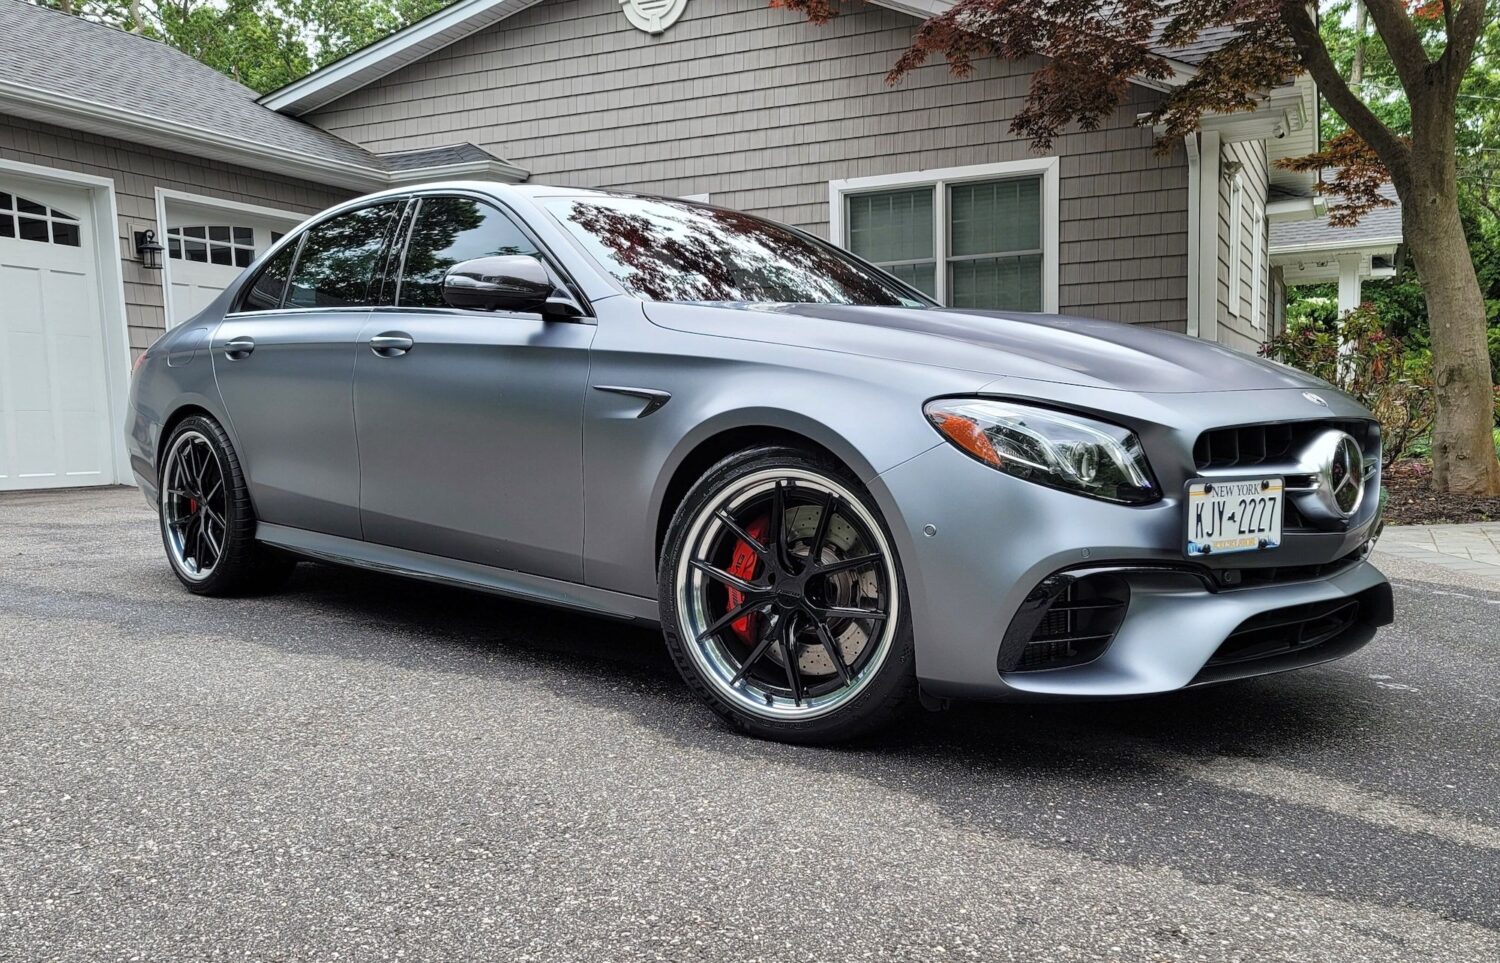 Mercedes-Benz E63 AMG W213 with 20-inch Forgeline AL301